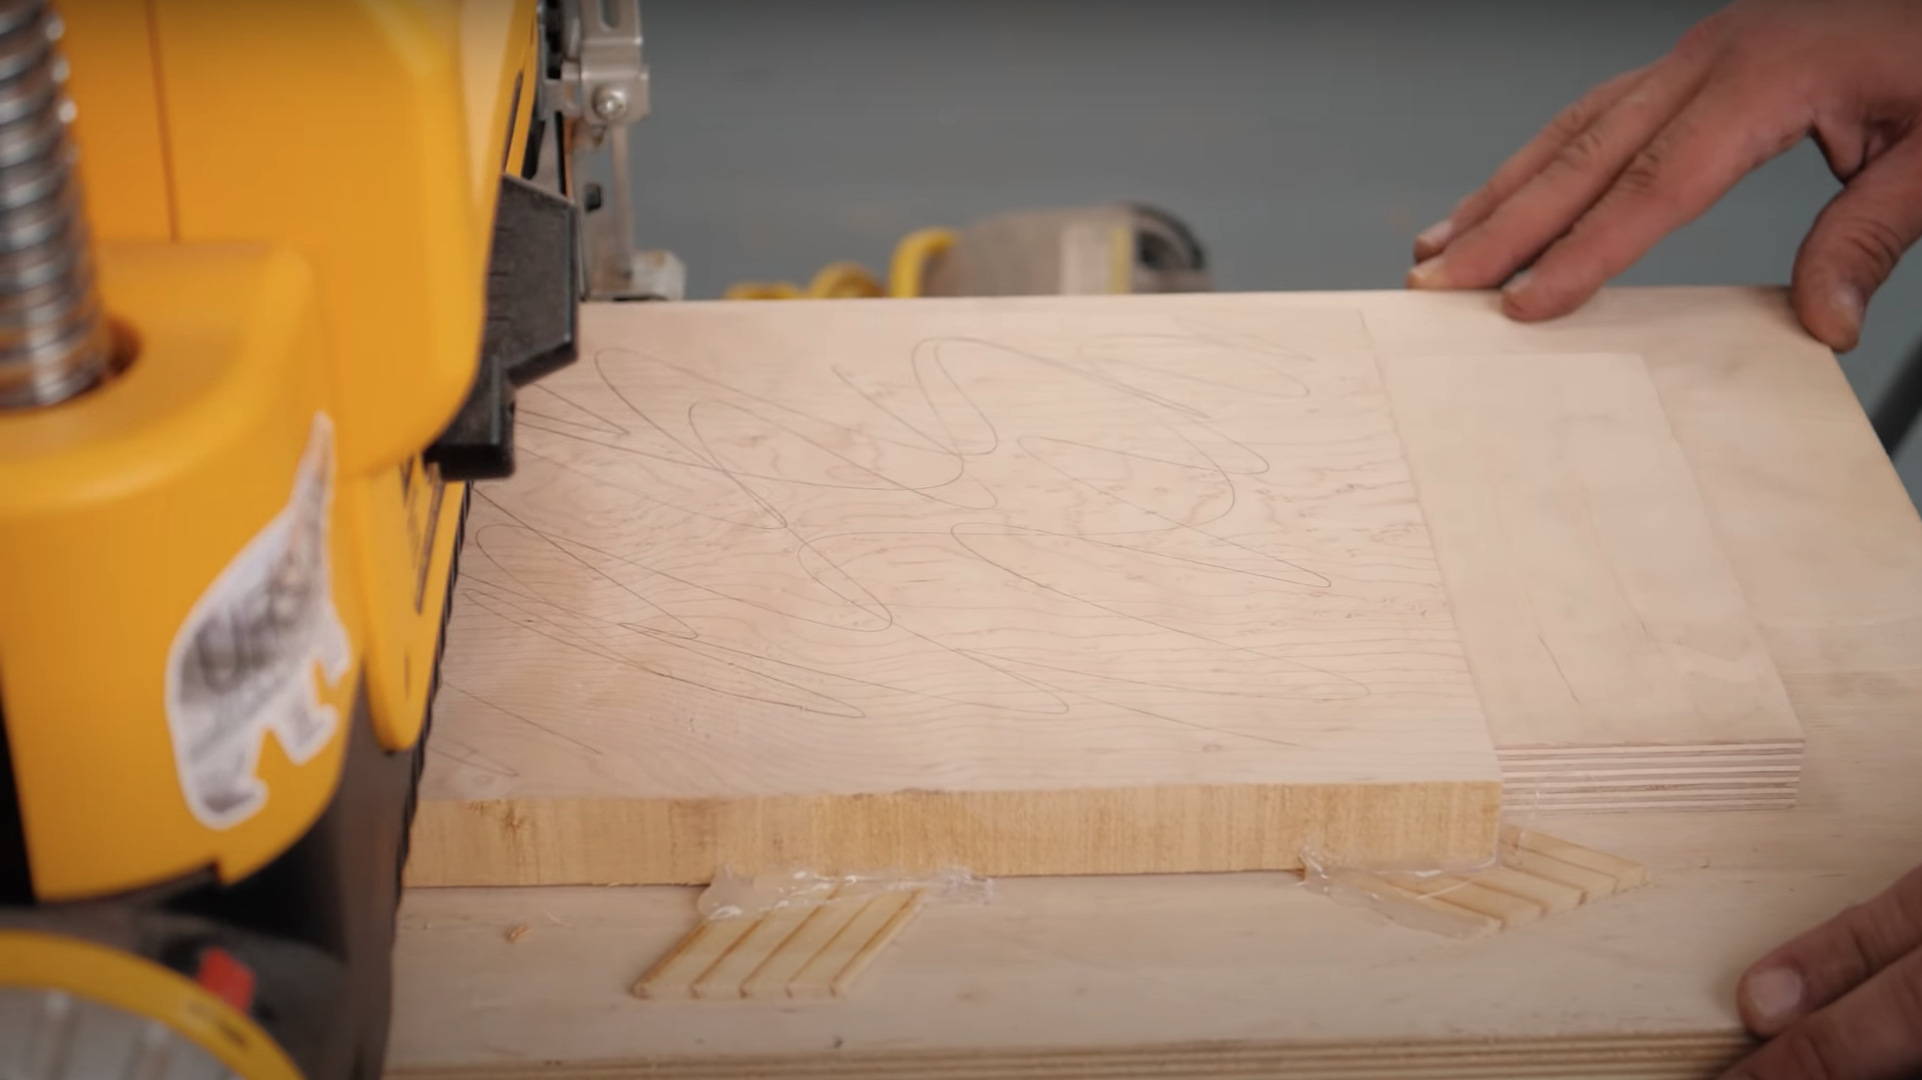 Running a jointing jig through a thickness planer